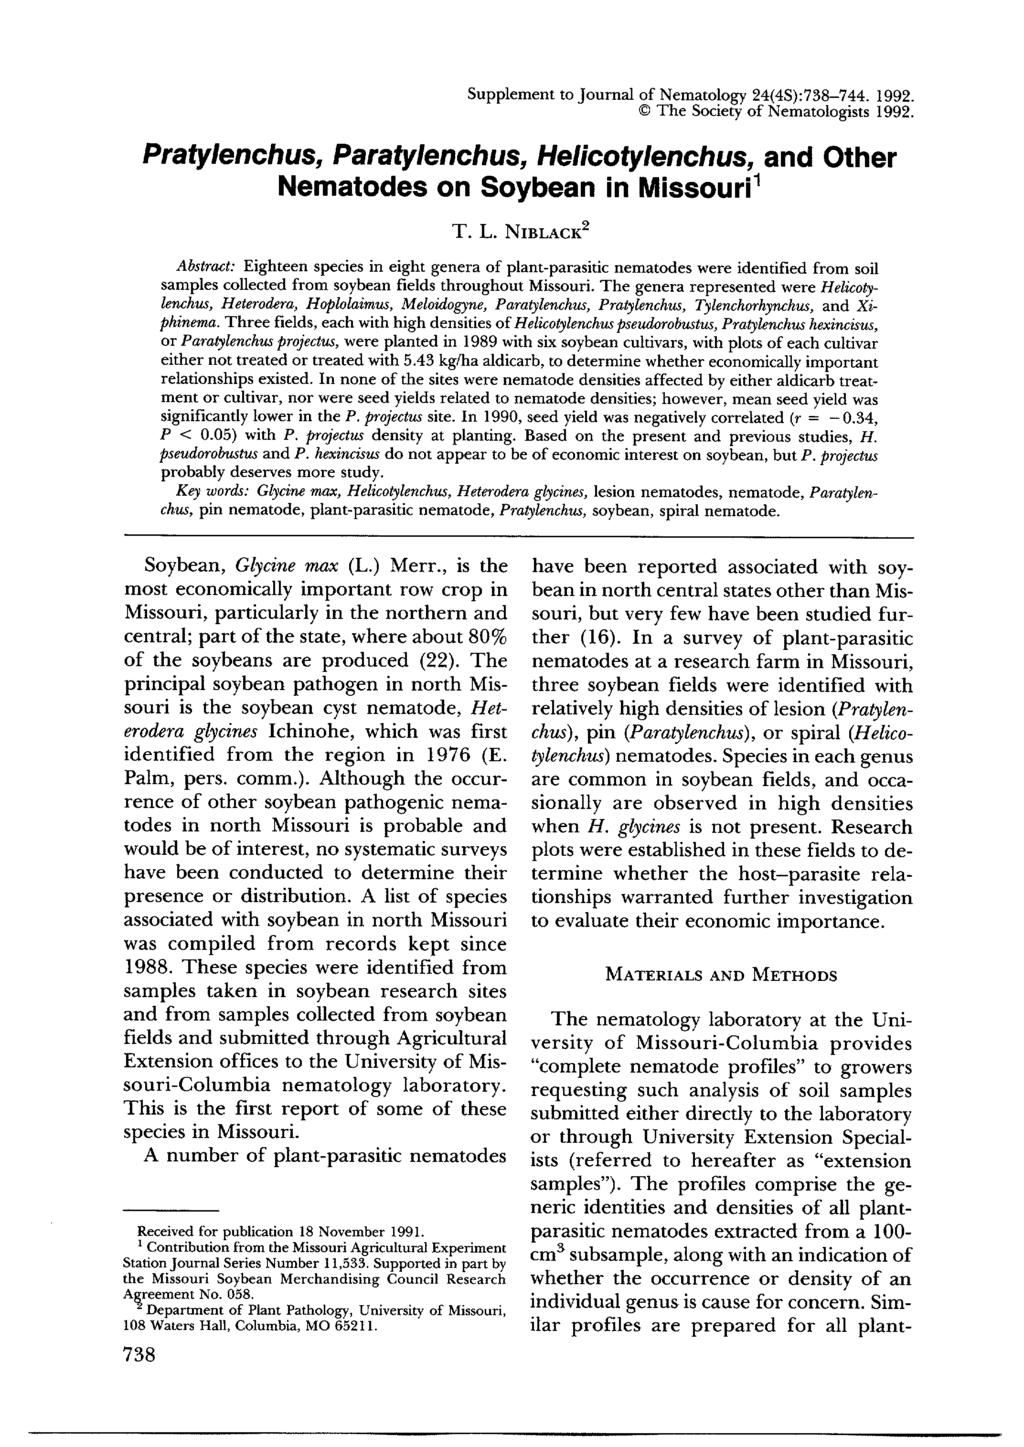 Supplement to Journal of Nematology 24(4S):738-744. 1992. The Society of Nematologists 1992. Pratylenchus, Paratylenchus, Helicotylenchus, and Other Nematodes on Soybean in Missouri 1 T. L.